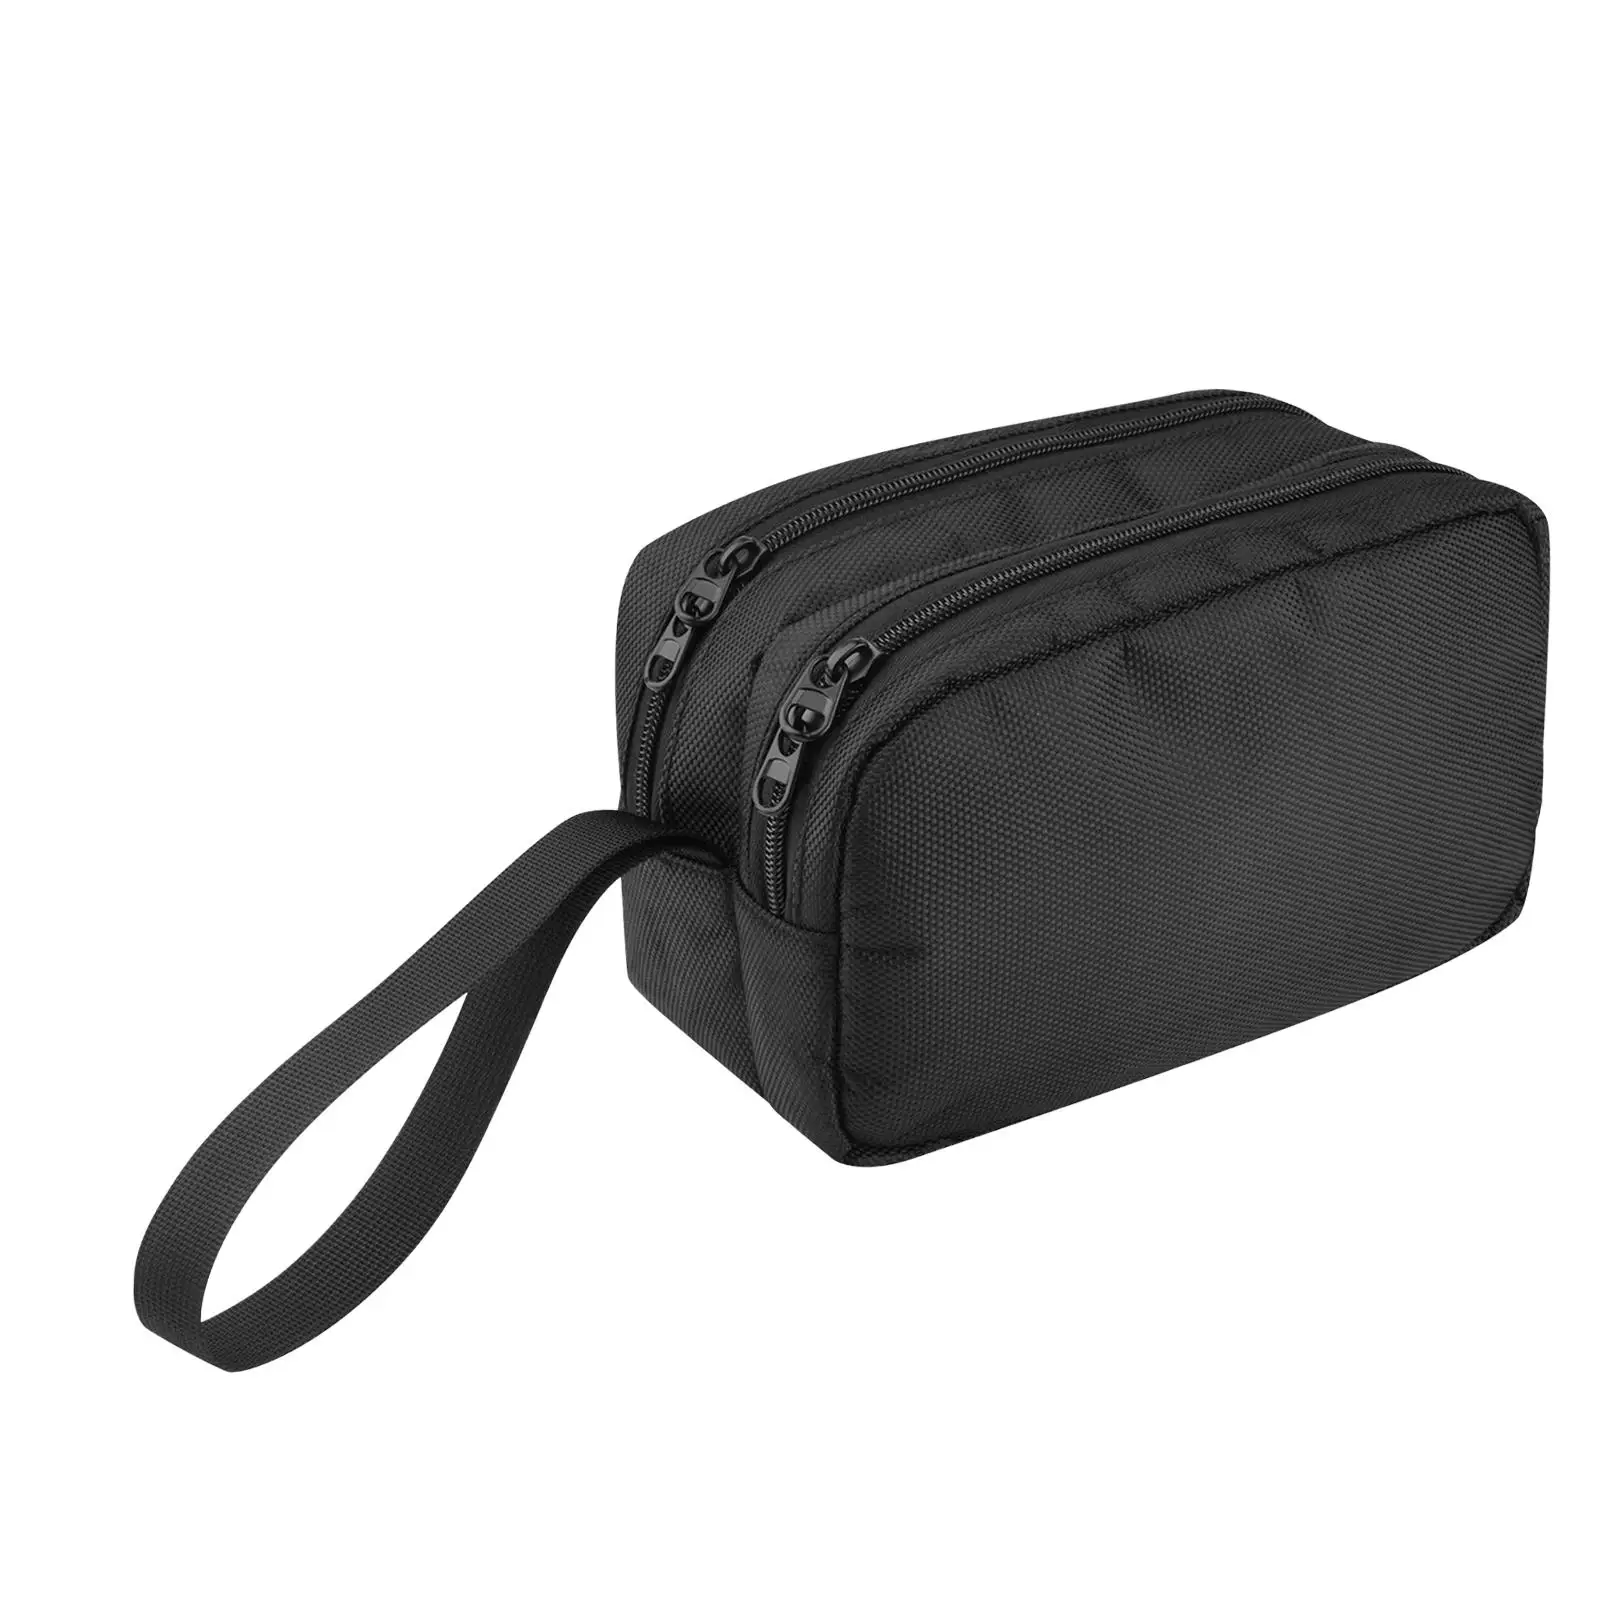 Black Carrying Case Electronics Accessories Organizer Bag for USB Cable